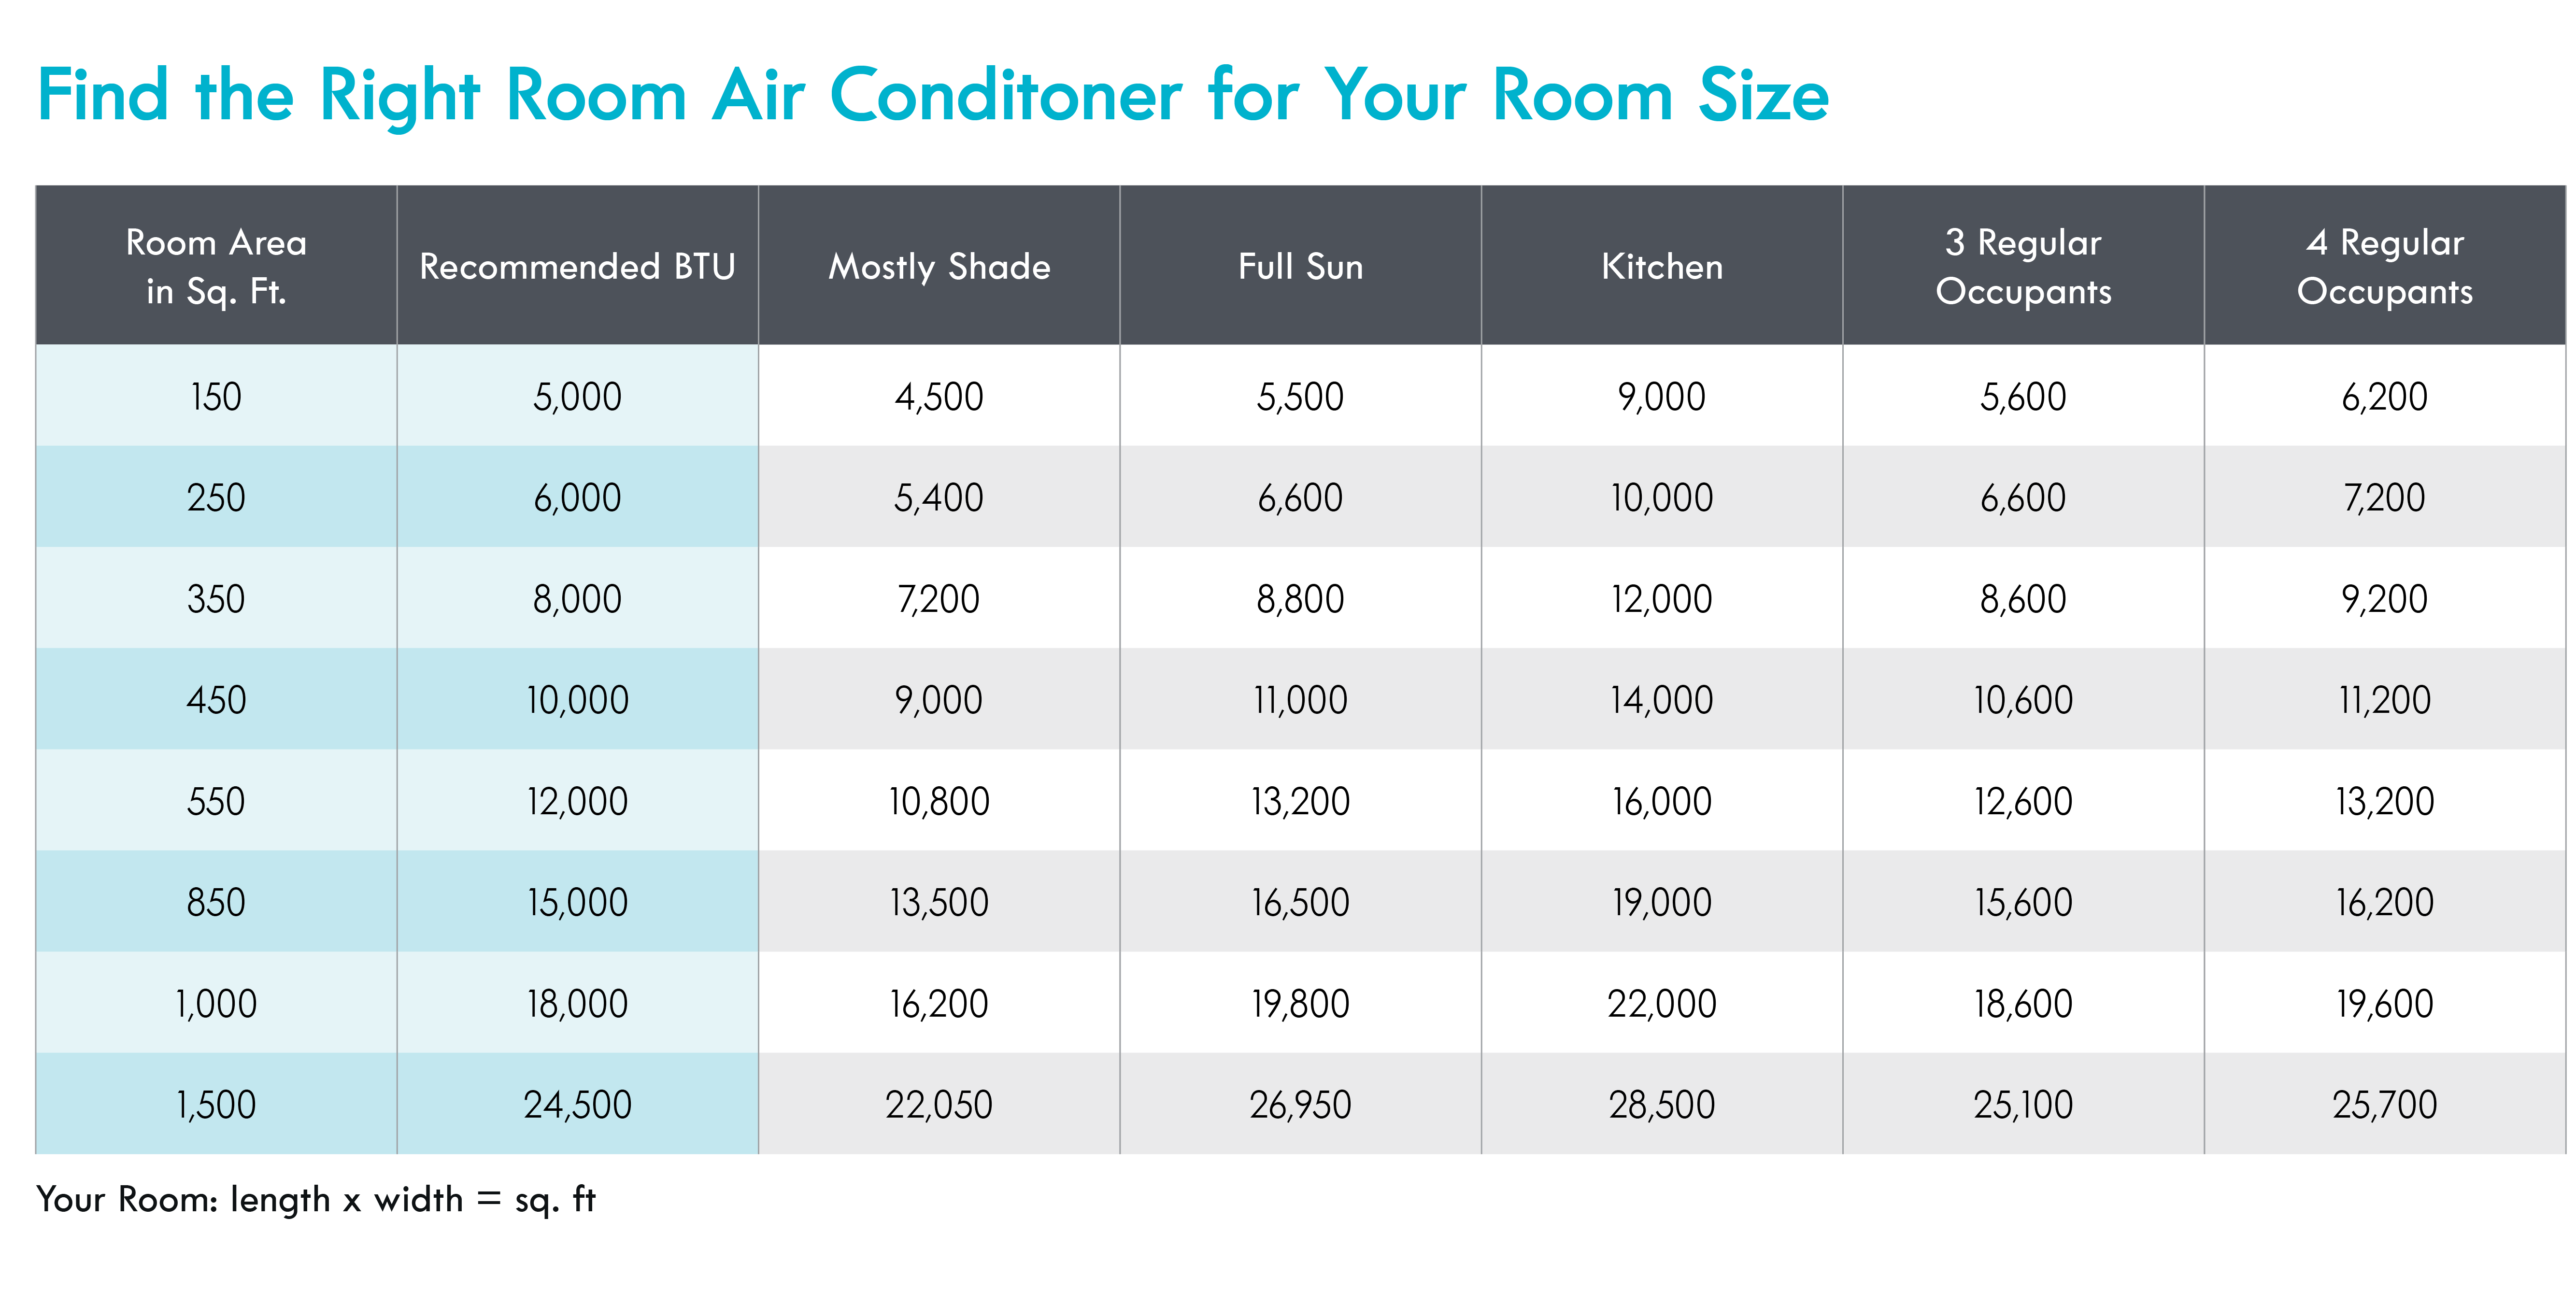 Find the right room air conditioner for your room size